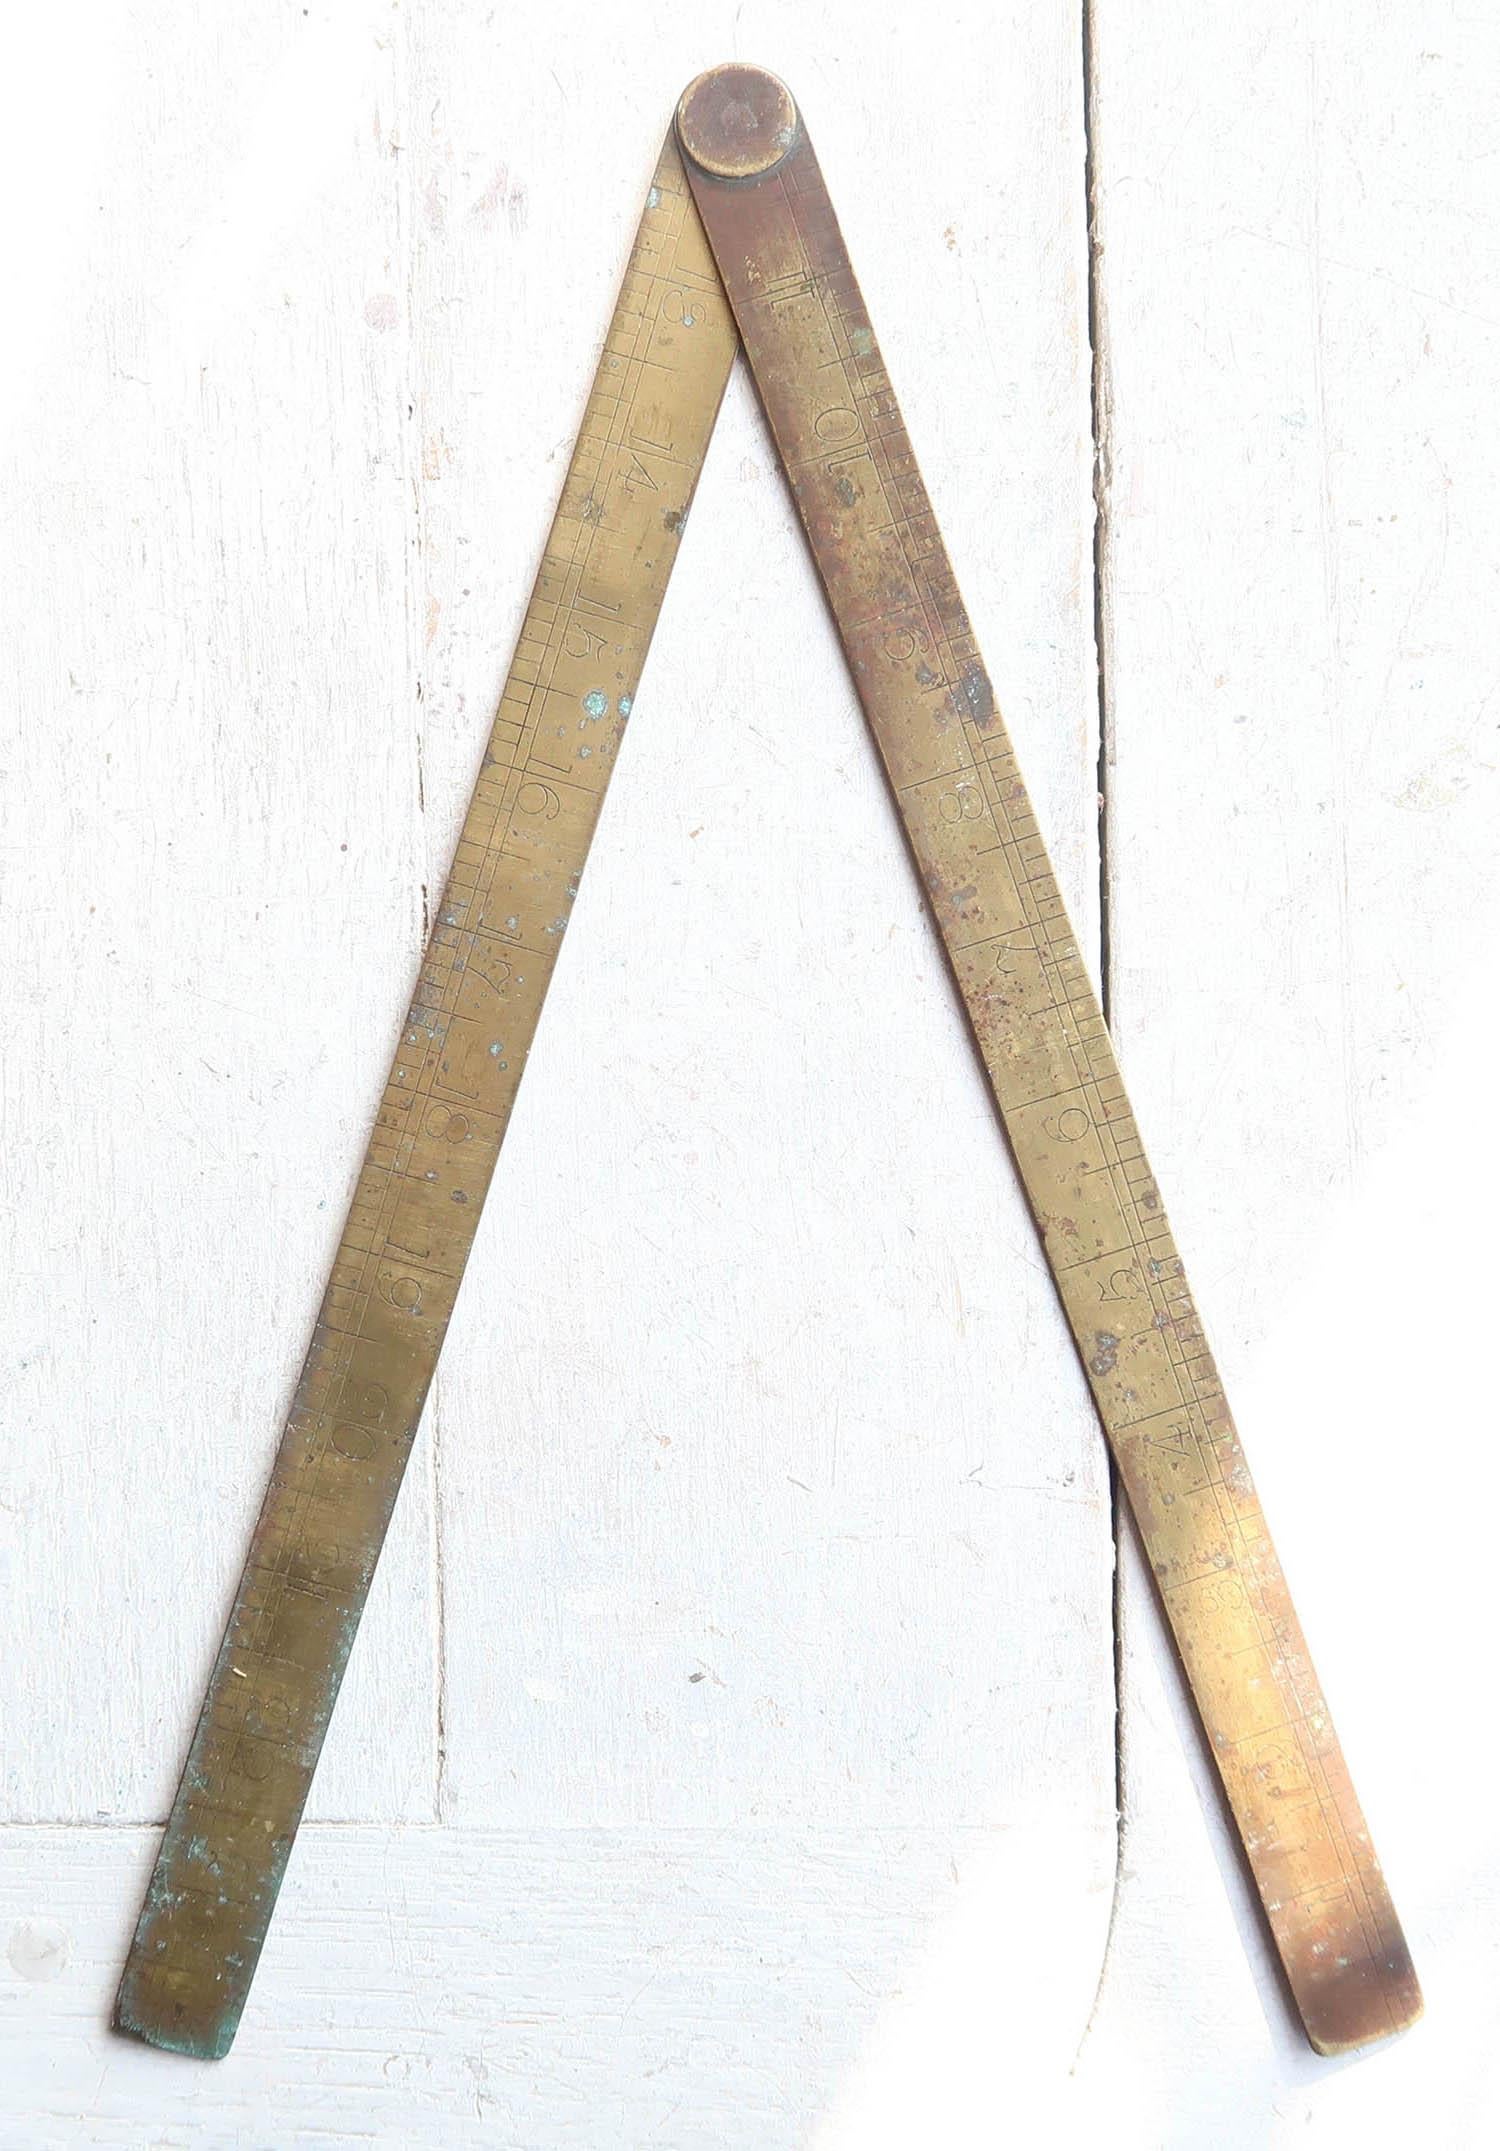 Brass folding ruler.

Folds out to a maximum of 24 inches

Finely engraved numerals

Original patina

No makers mark